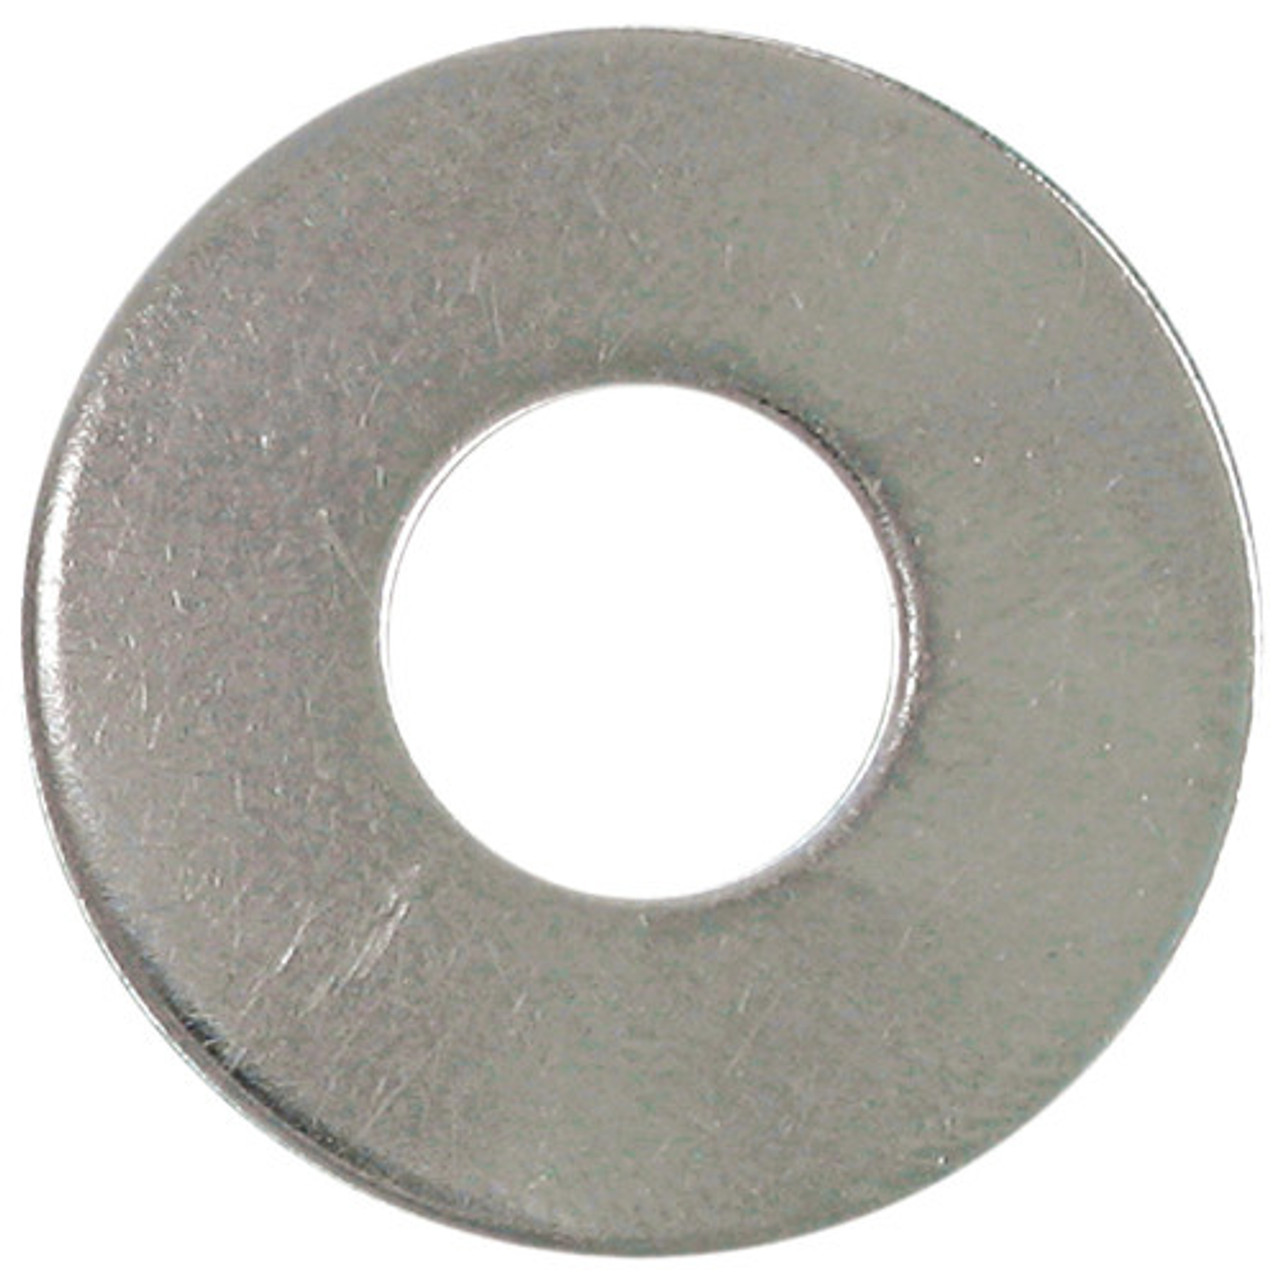 5/16" Zinc Plated Spacer Washer 100 Pc.   162-916